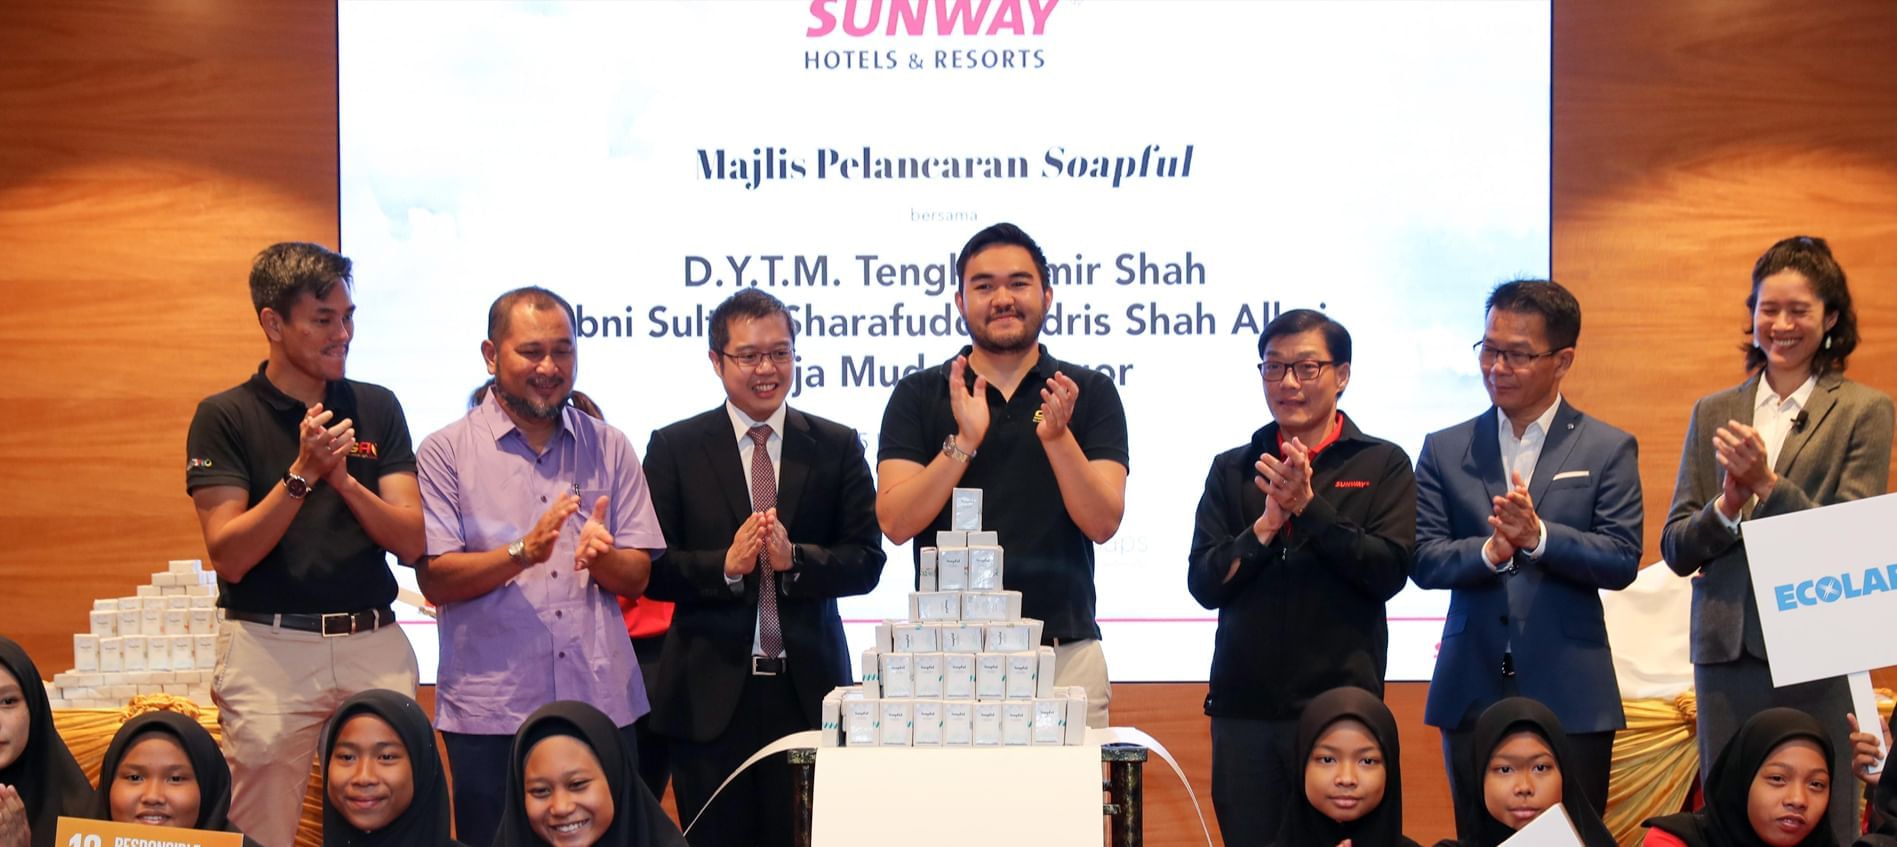 Soapful for The Community inauguration at Sunway Resort